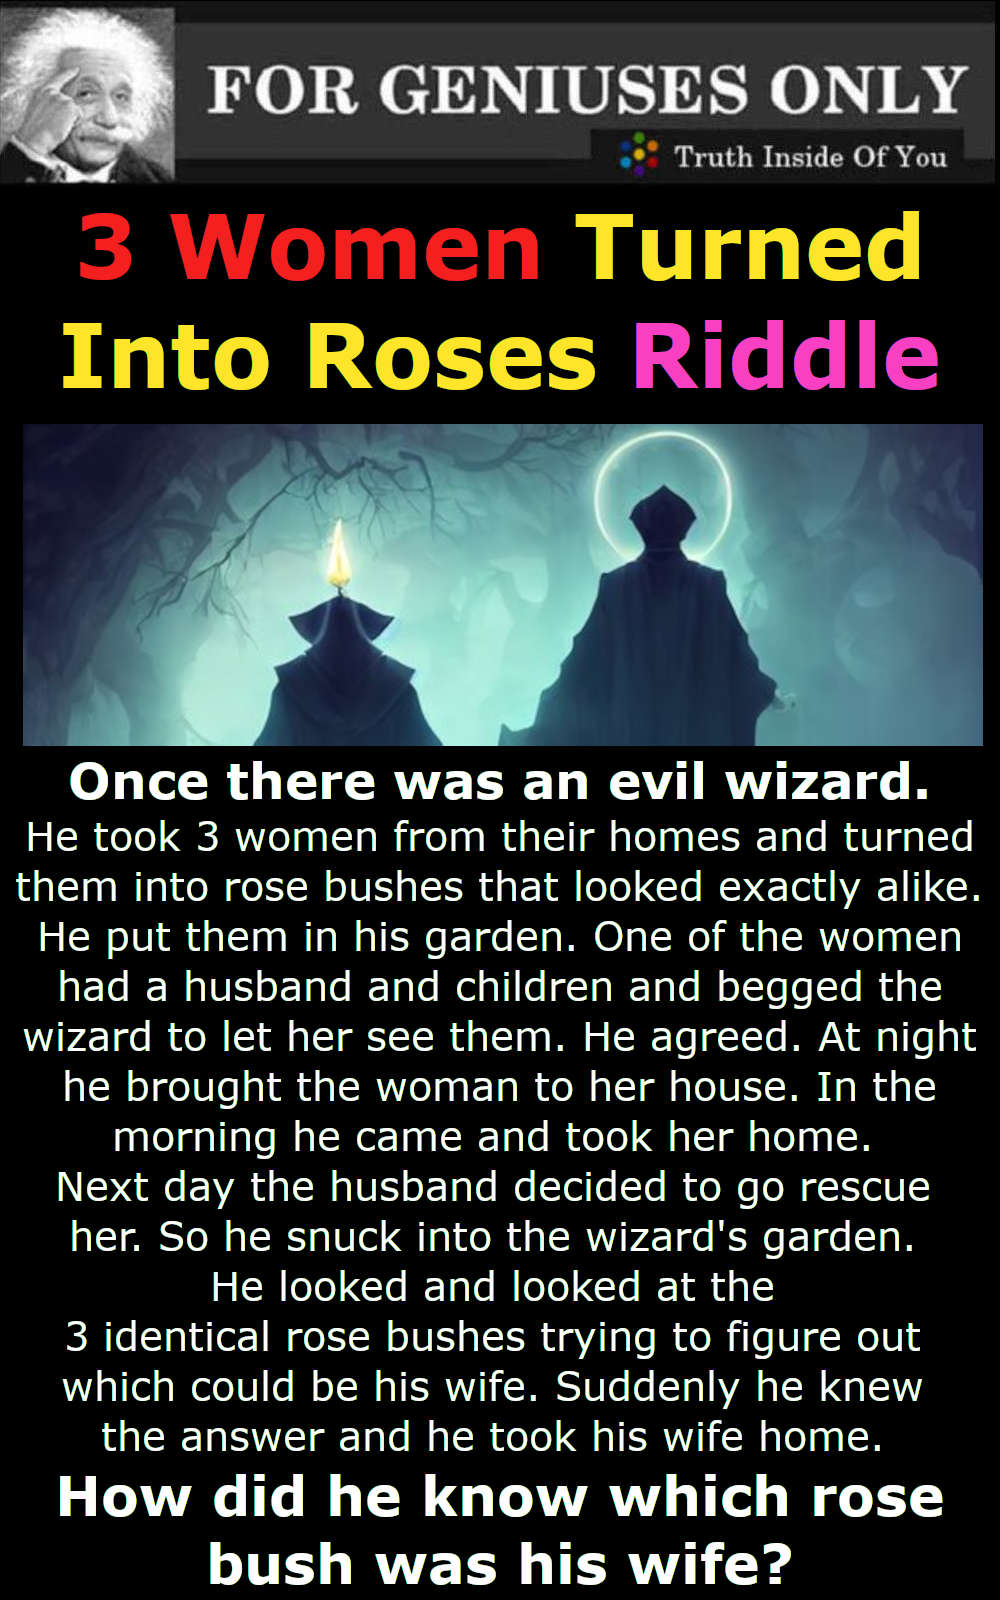 3 Women Turned Into Roses Riddle